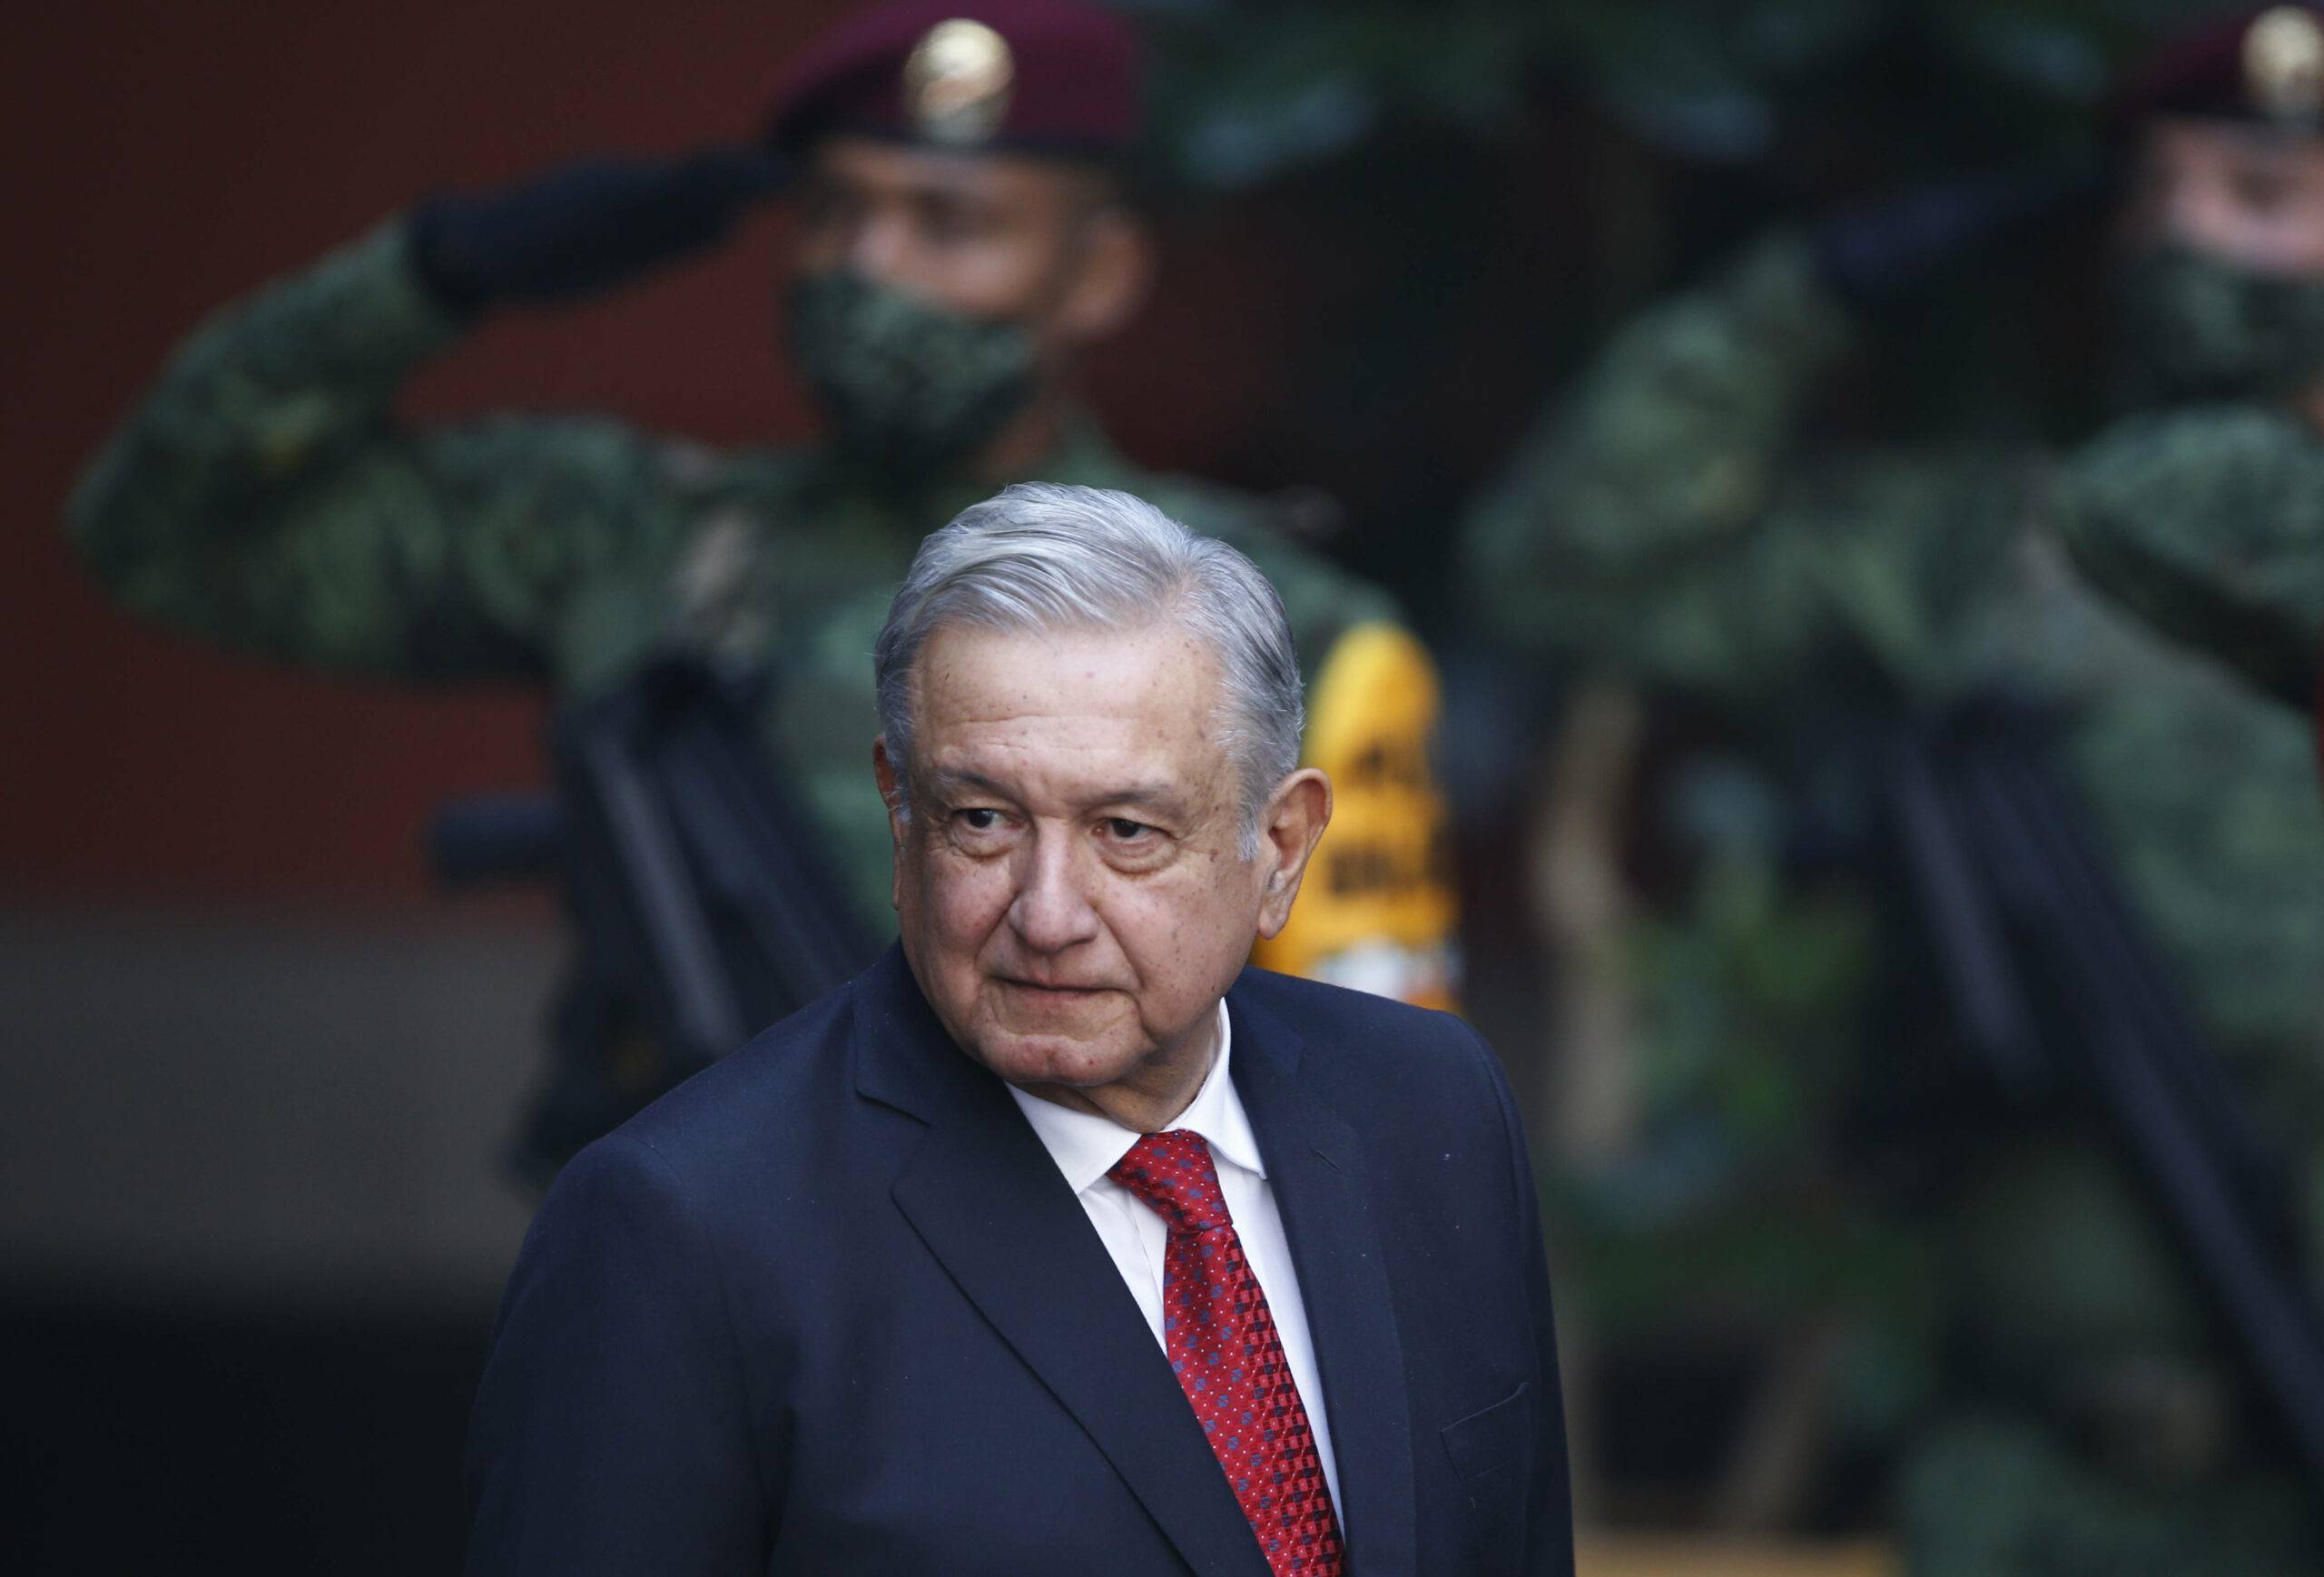 Mexican President Andres Manuel Lopez Obrador attends a ceremony at the National Palace in Mexico City, Tuesday, Feb. 23, 2021. (AP Photo/Marco Ugarte)/OTKMXMU139/21054667498416//2102231939